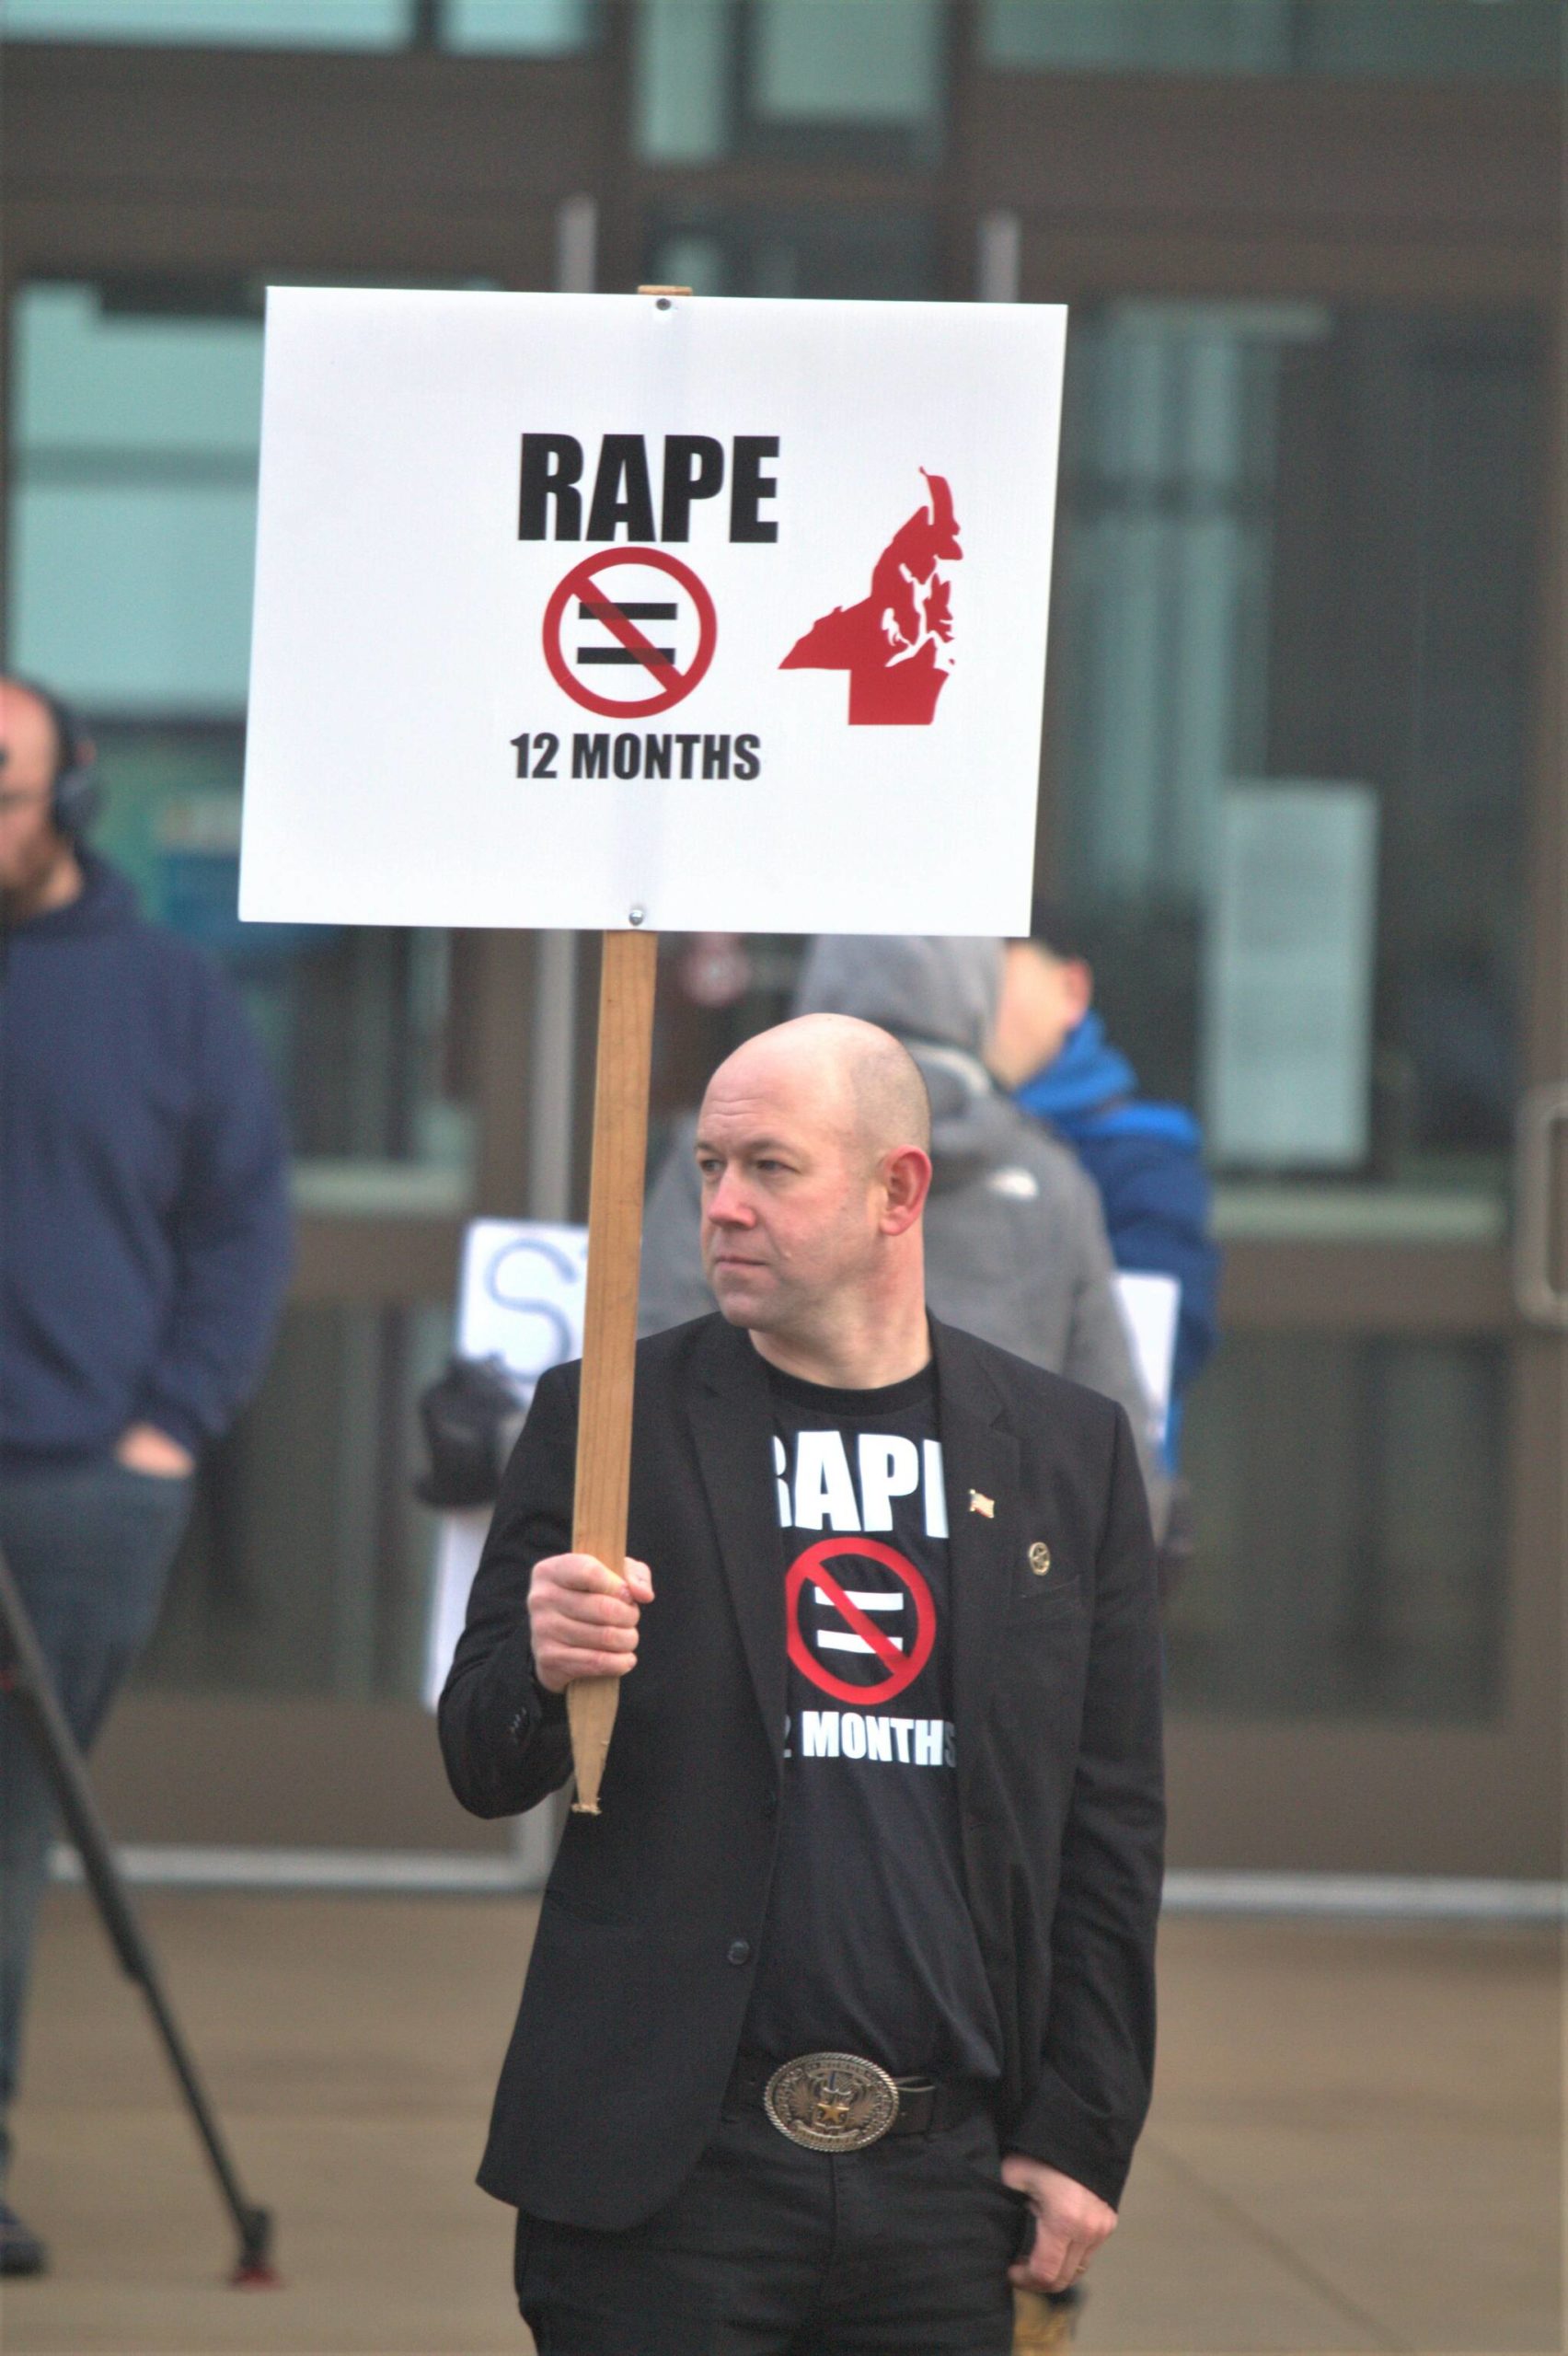 Local politician Rick Kuss holds a sign with the same message as his recently marketed shirt in protest of the plea agreement in a rape case.